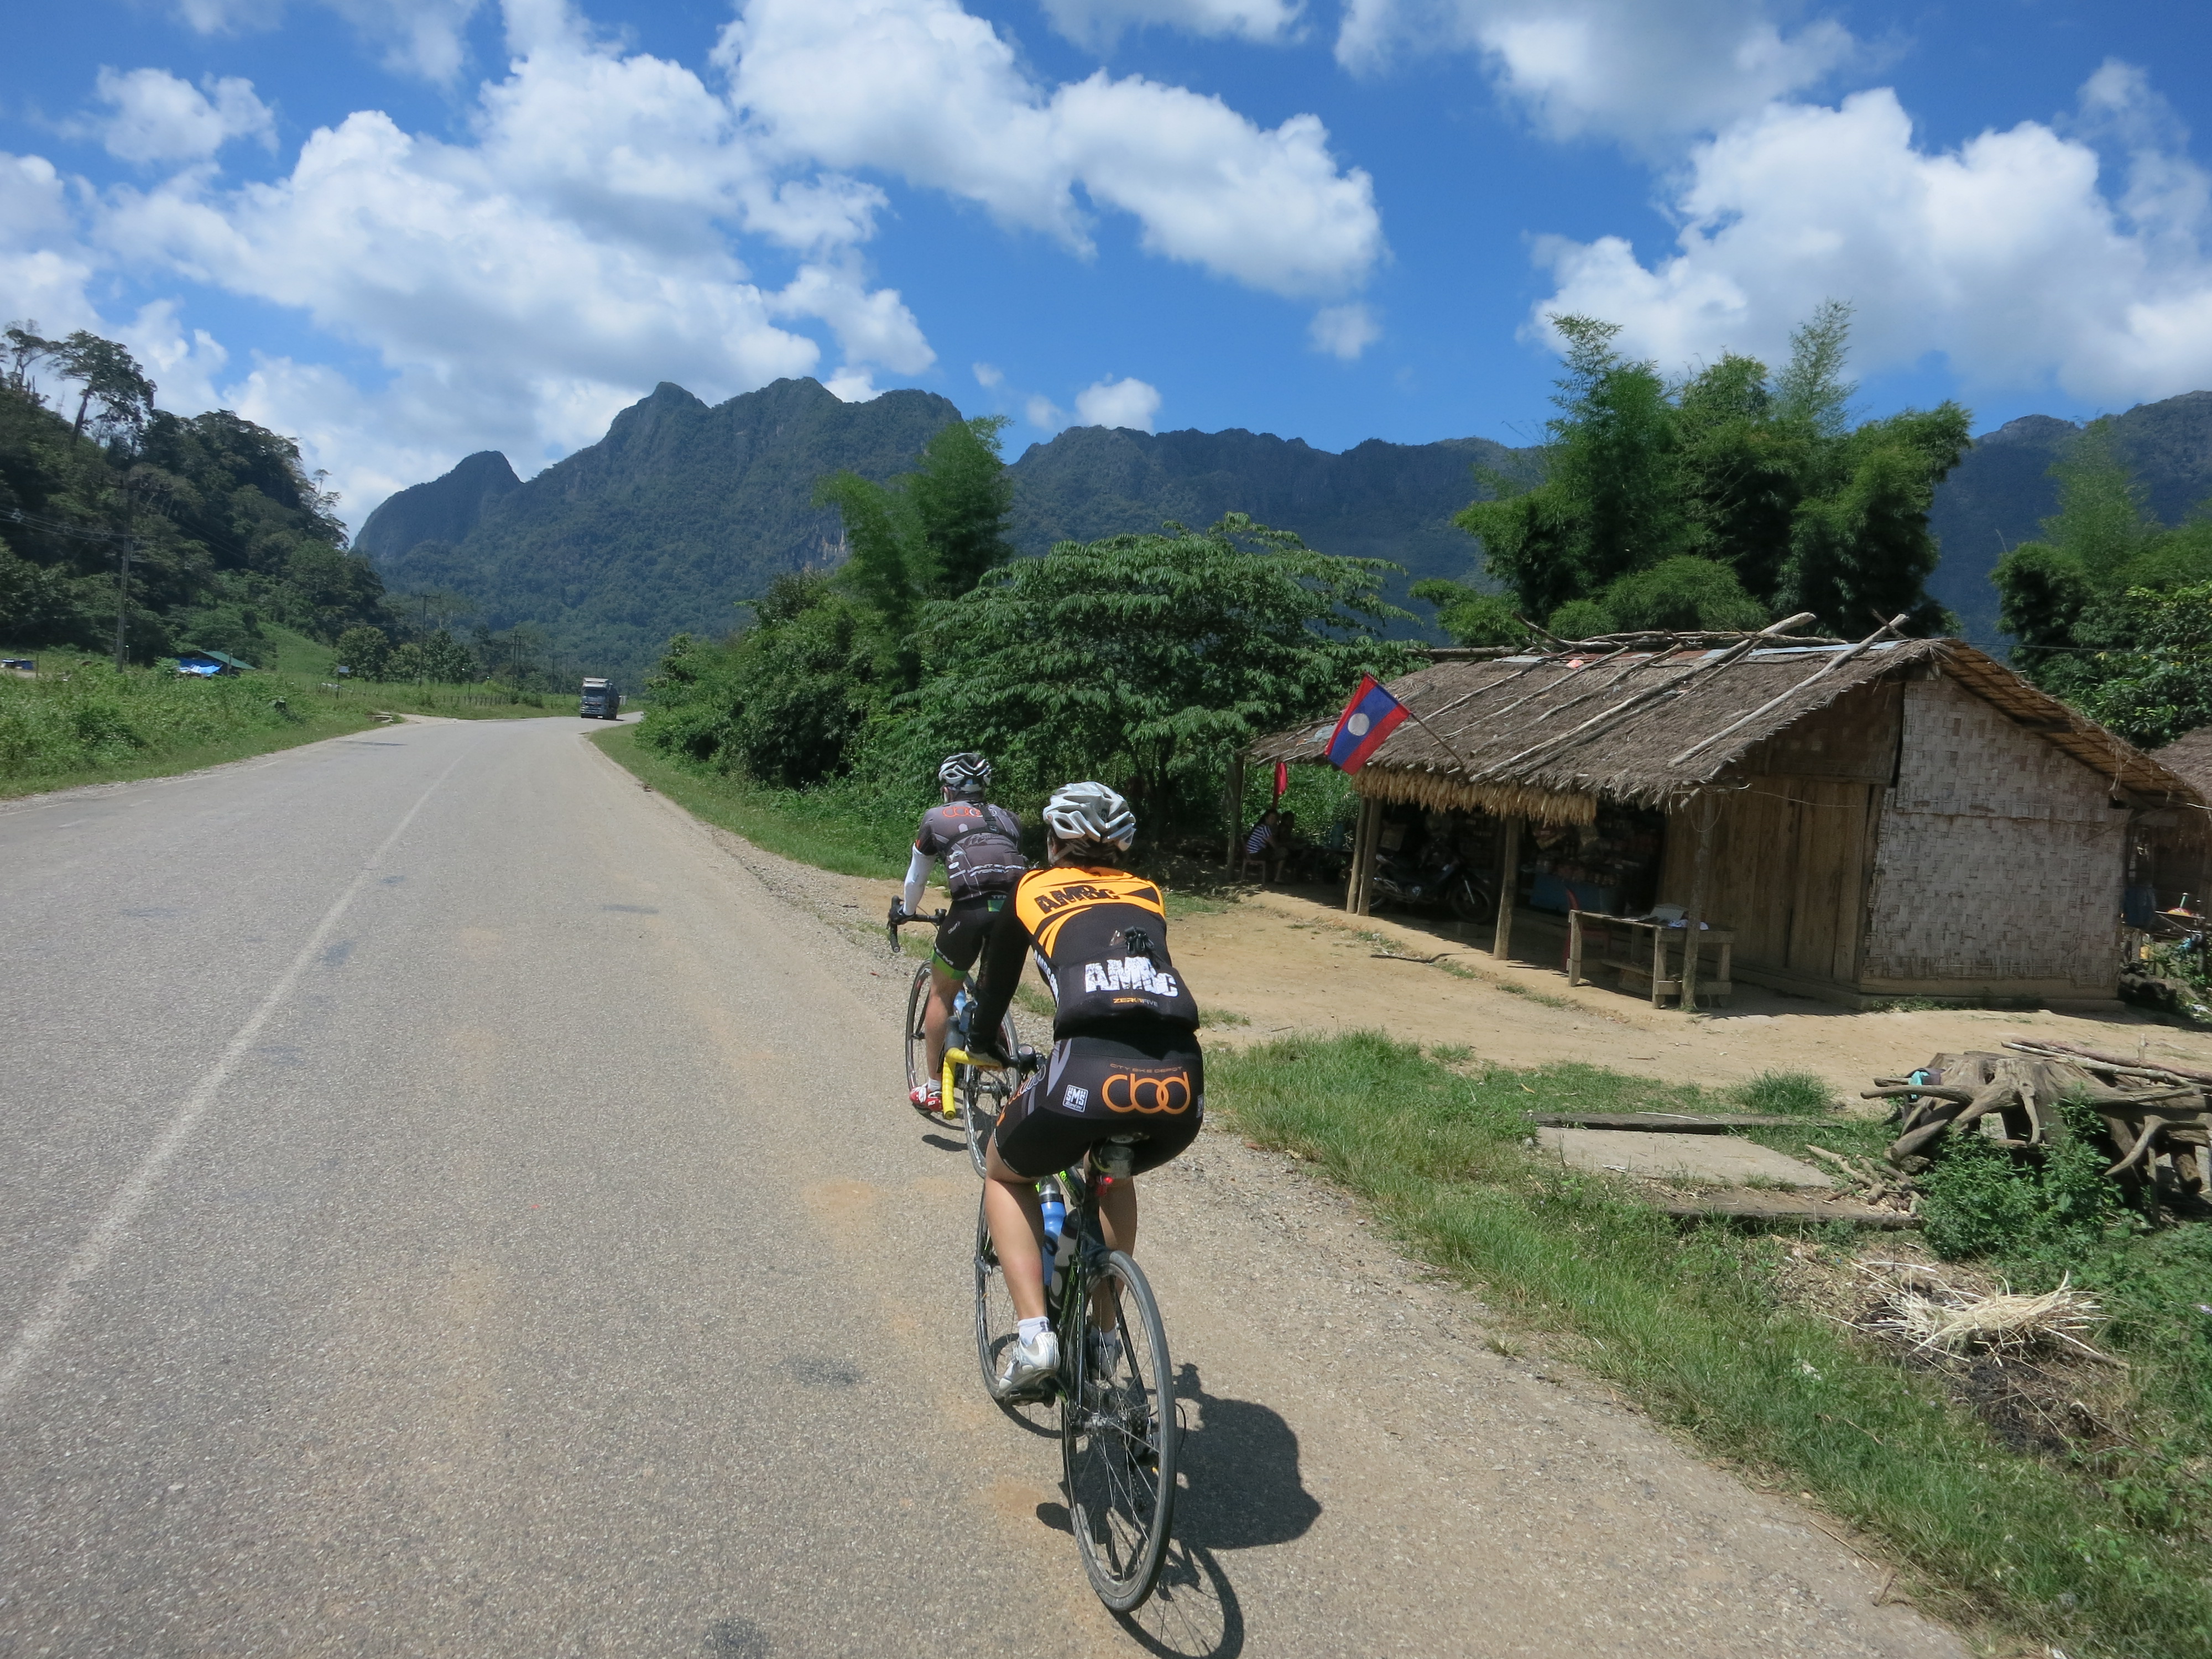 lao roads and mountains